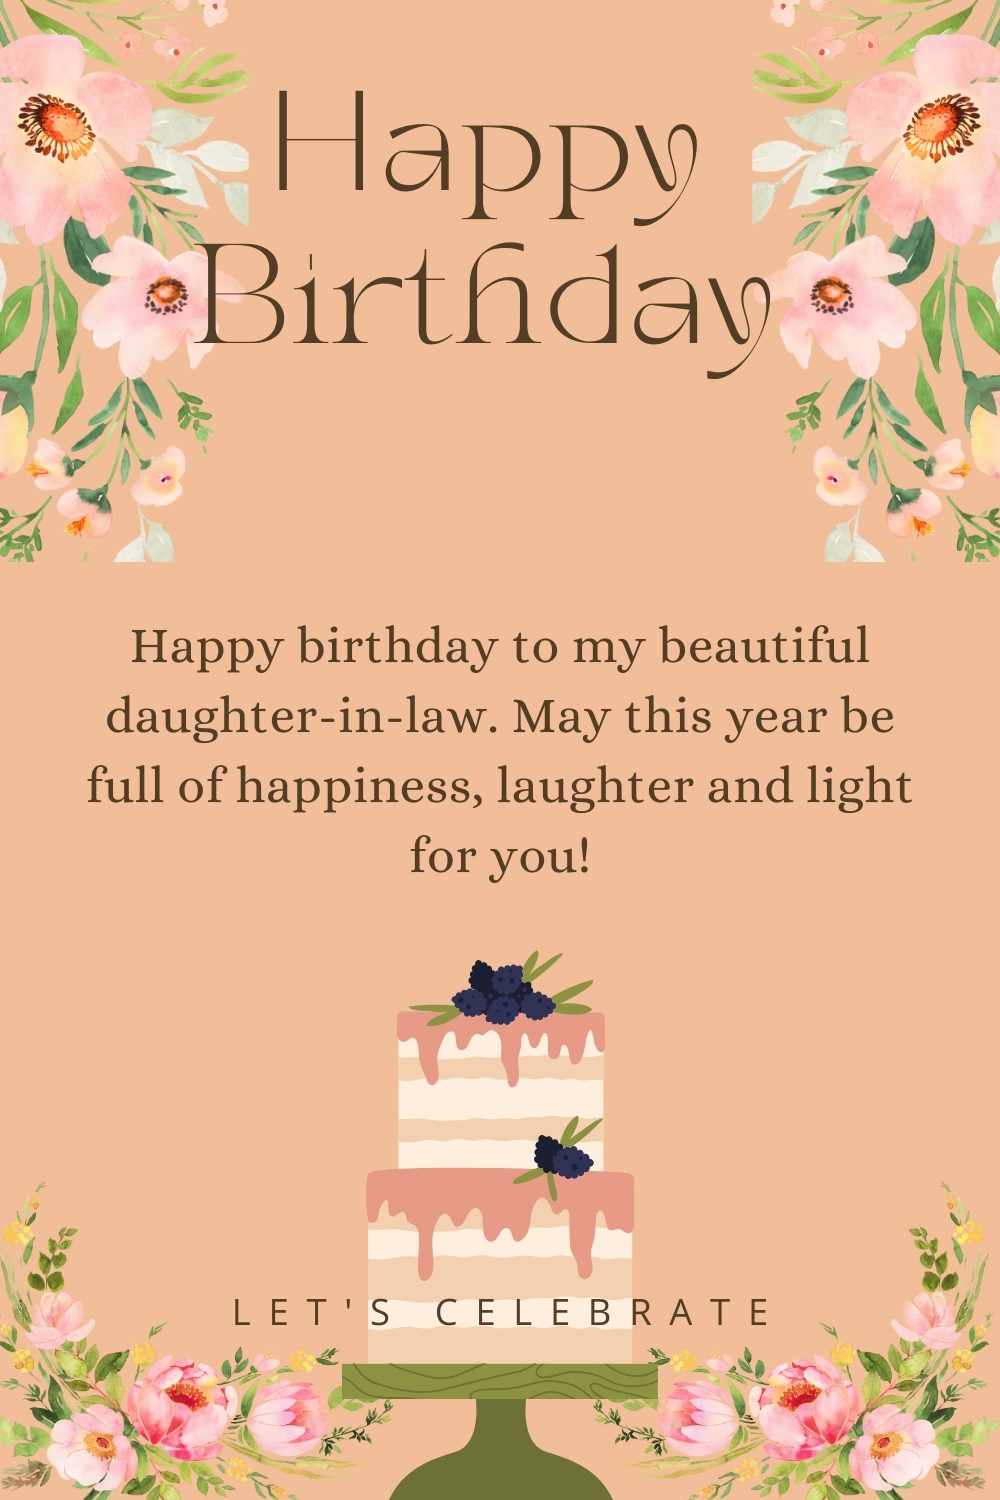 200+ Warm Birthday Wishes for Daughter-in-Law - Arvin